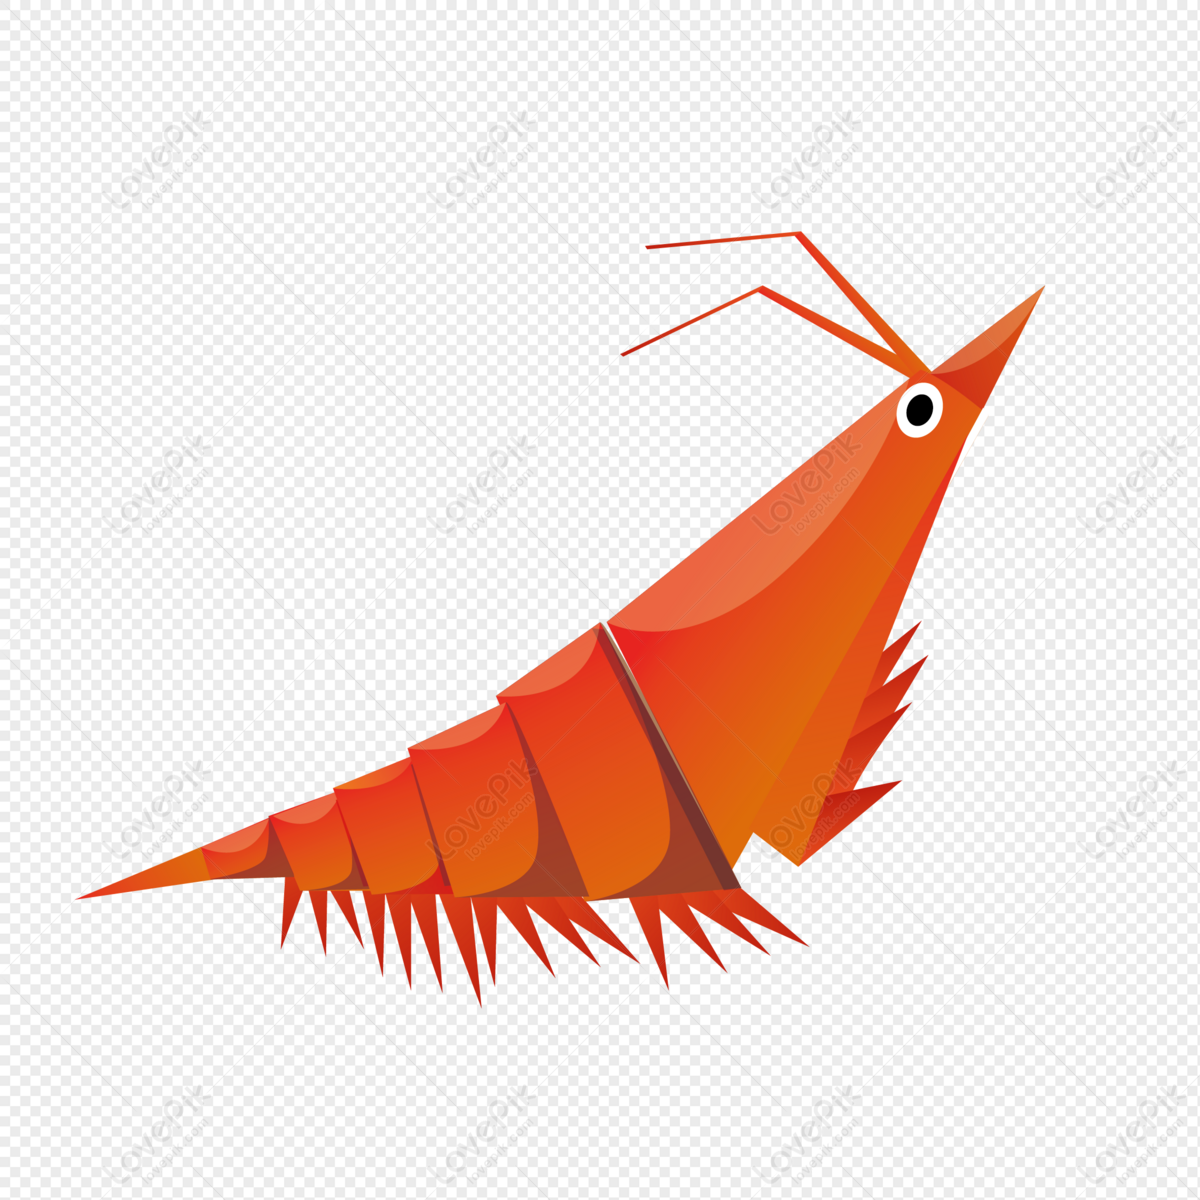 Mobile wallpaper: Anime, Sergestid Shrimp In Tungkang, 879692 download the  picture for free.